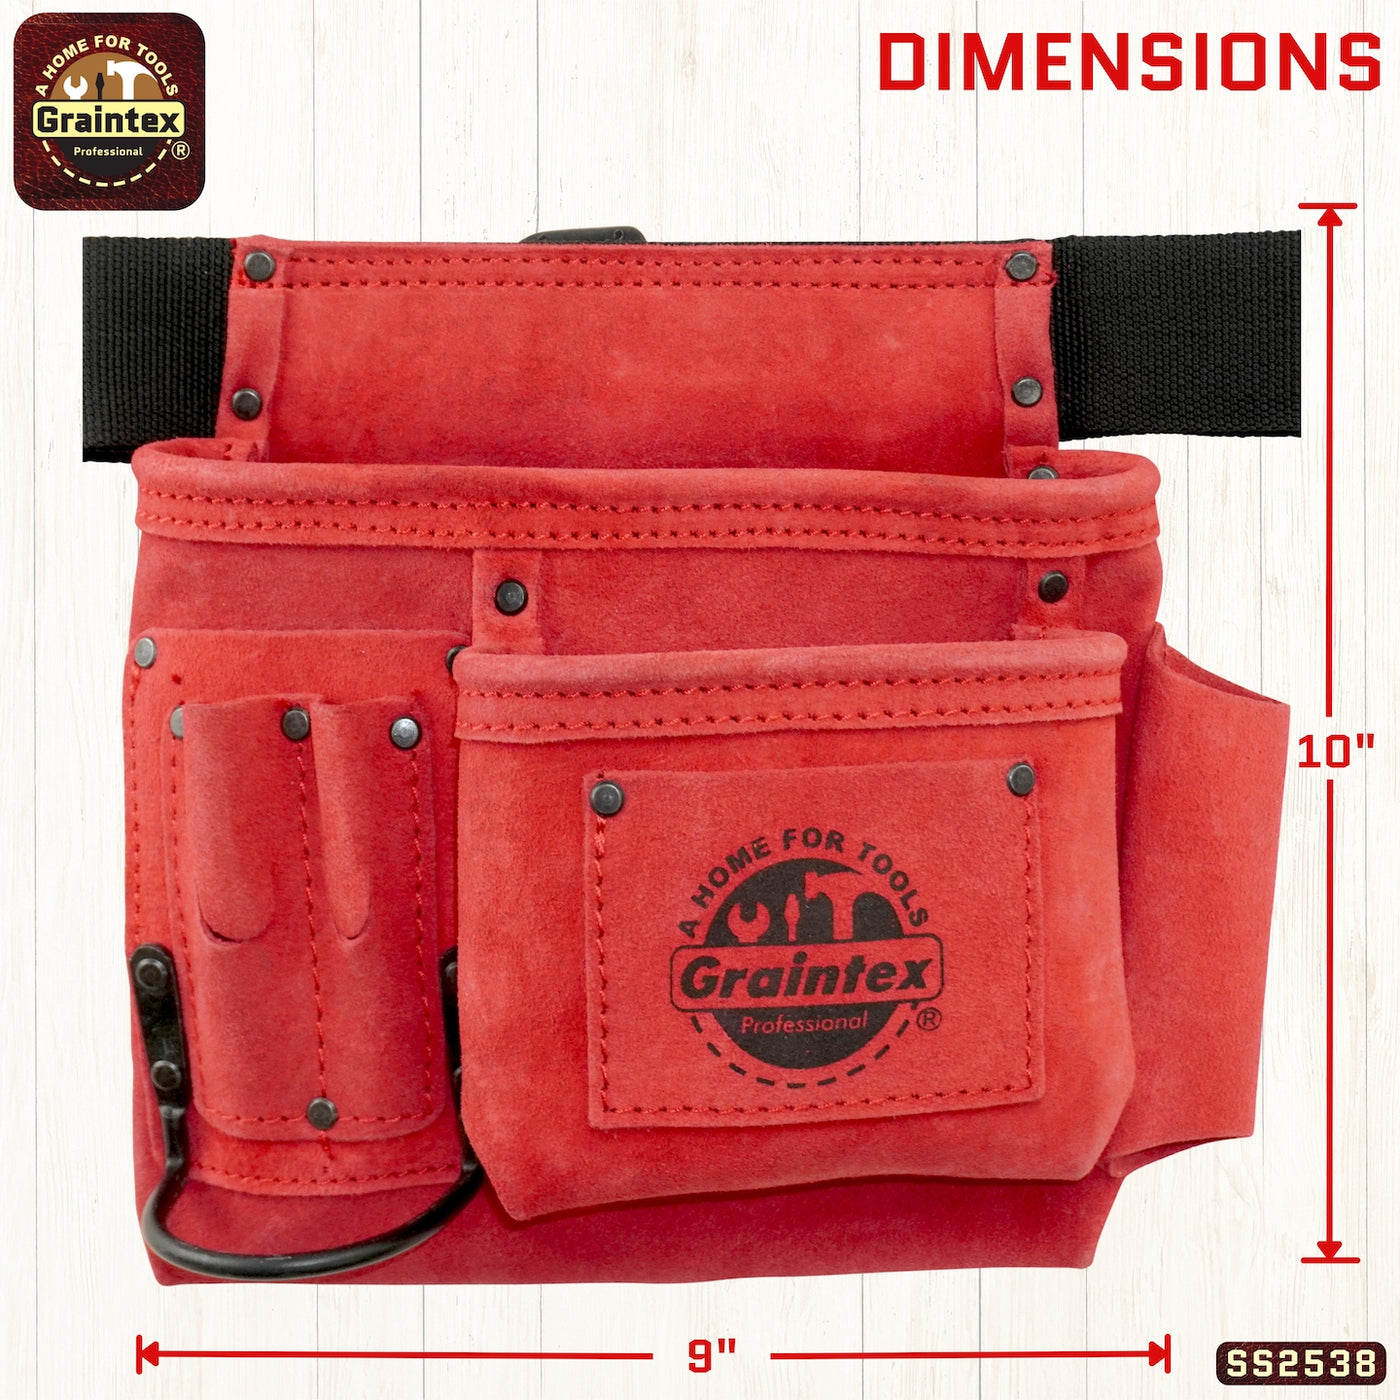 SS2538 :: 5 Pocket Nail & Tool Pouch Red Color Suede Leather with Belt